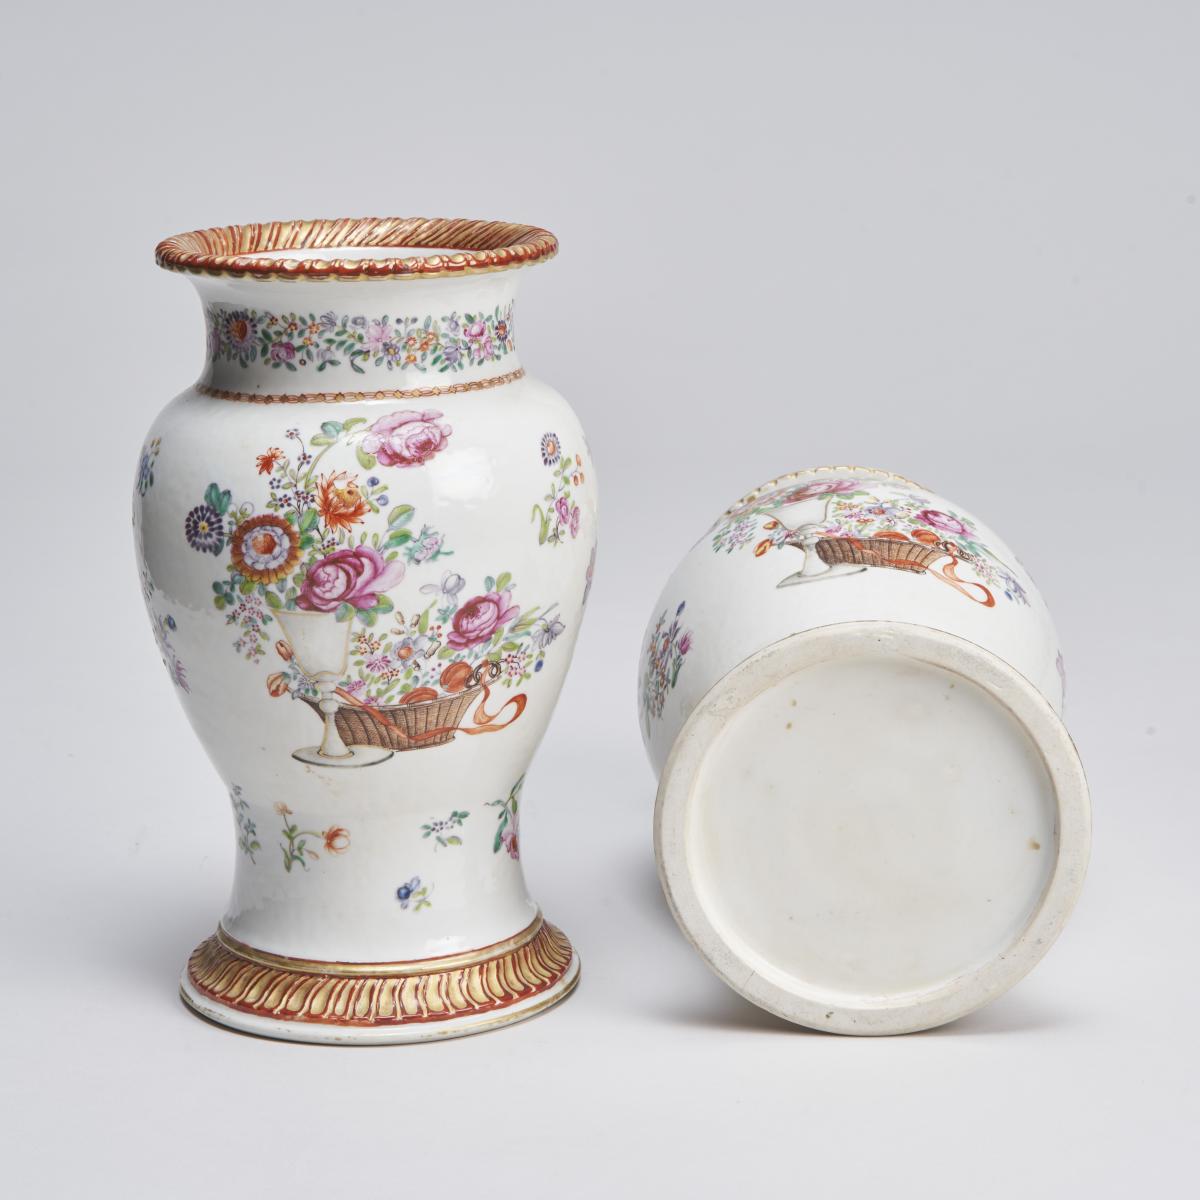 An elegant pair of 18th Century Chinese export Famille Rose vases